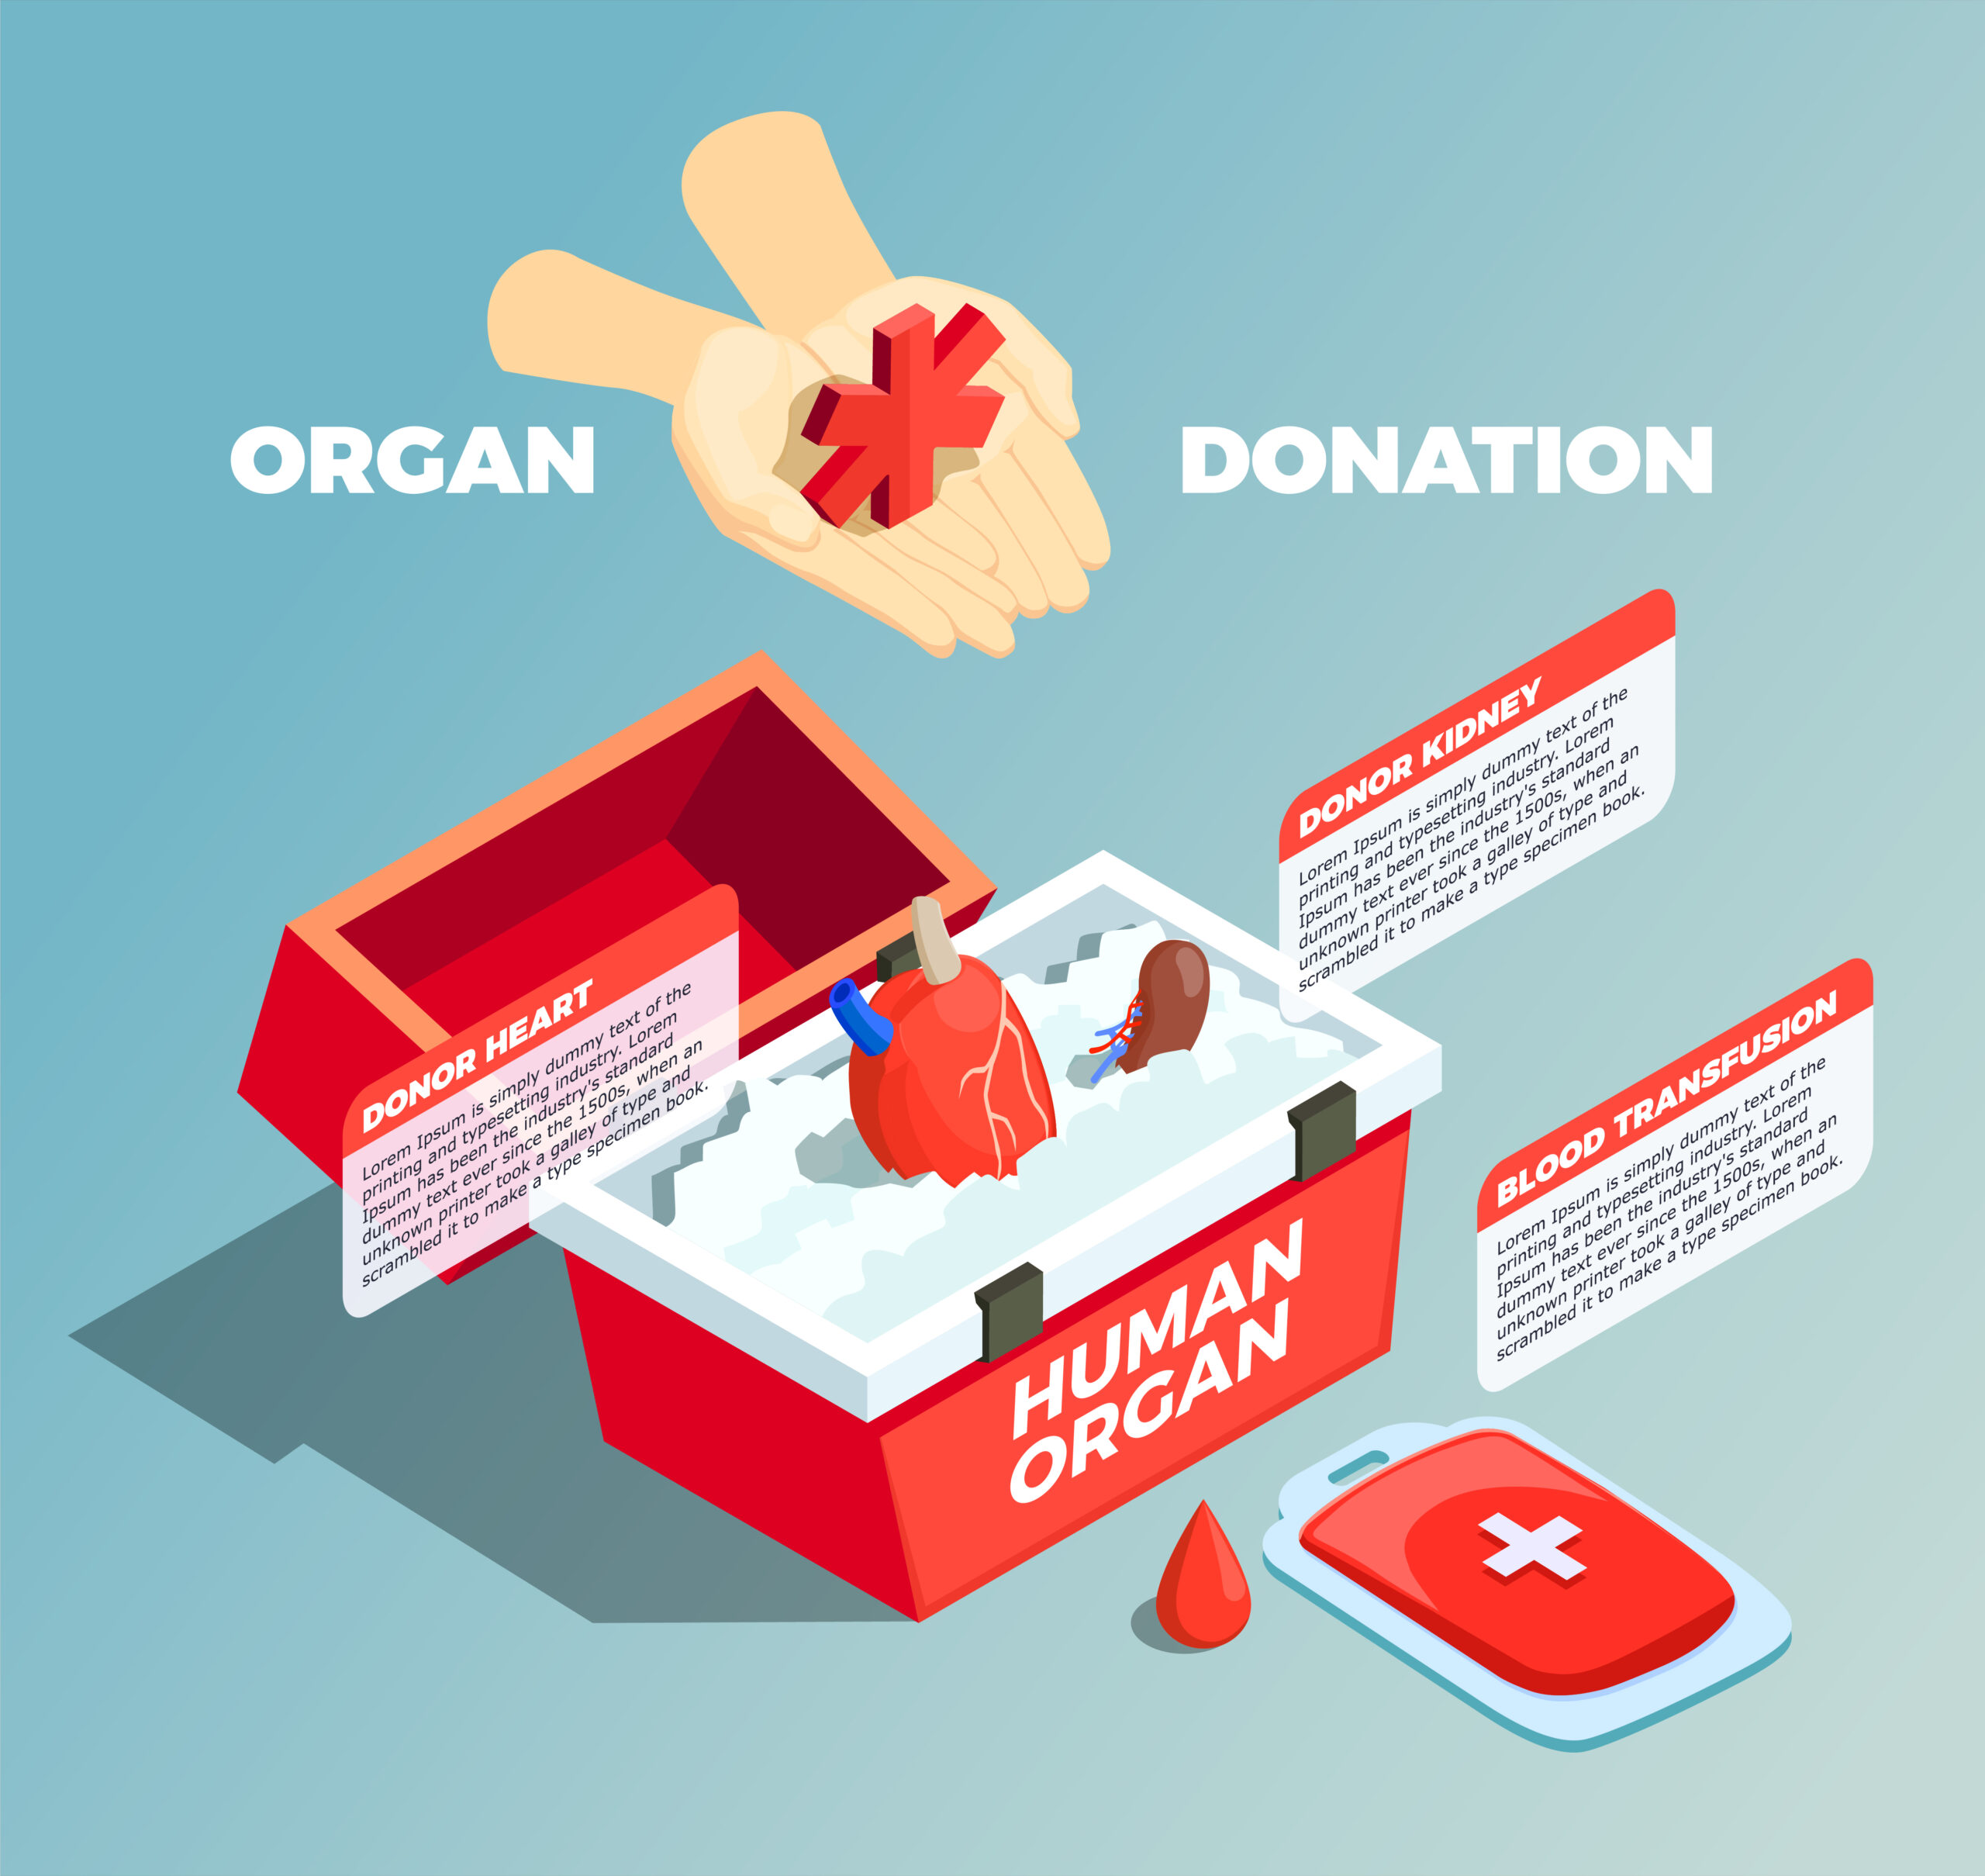 What You Need to Know About Organ Donations